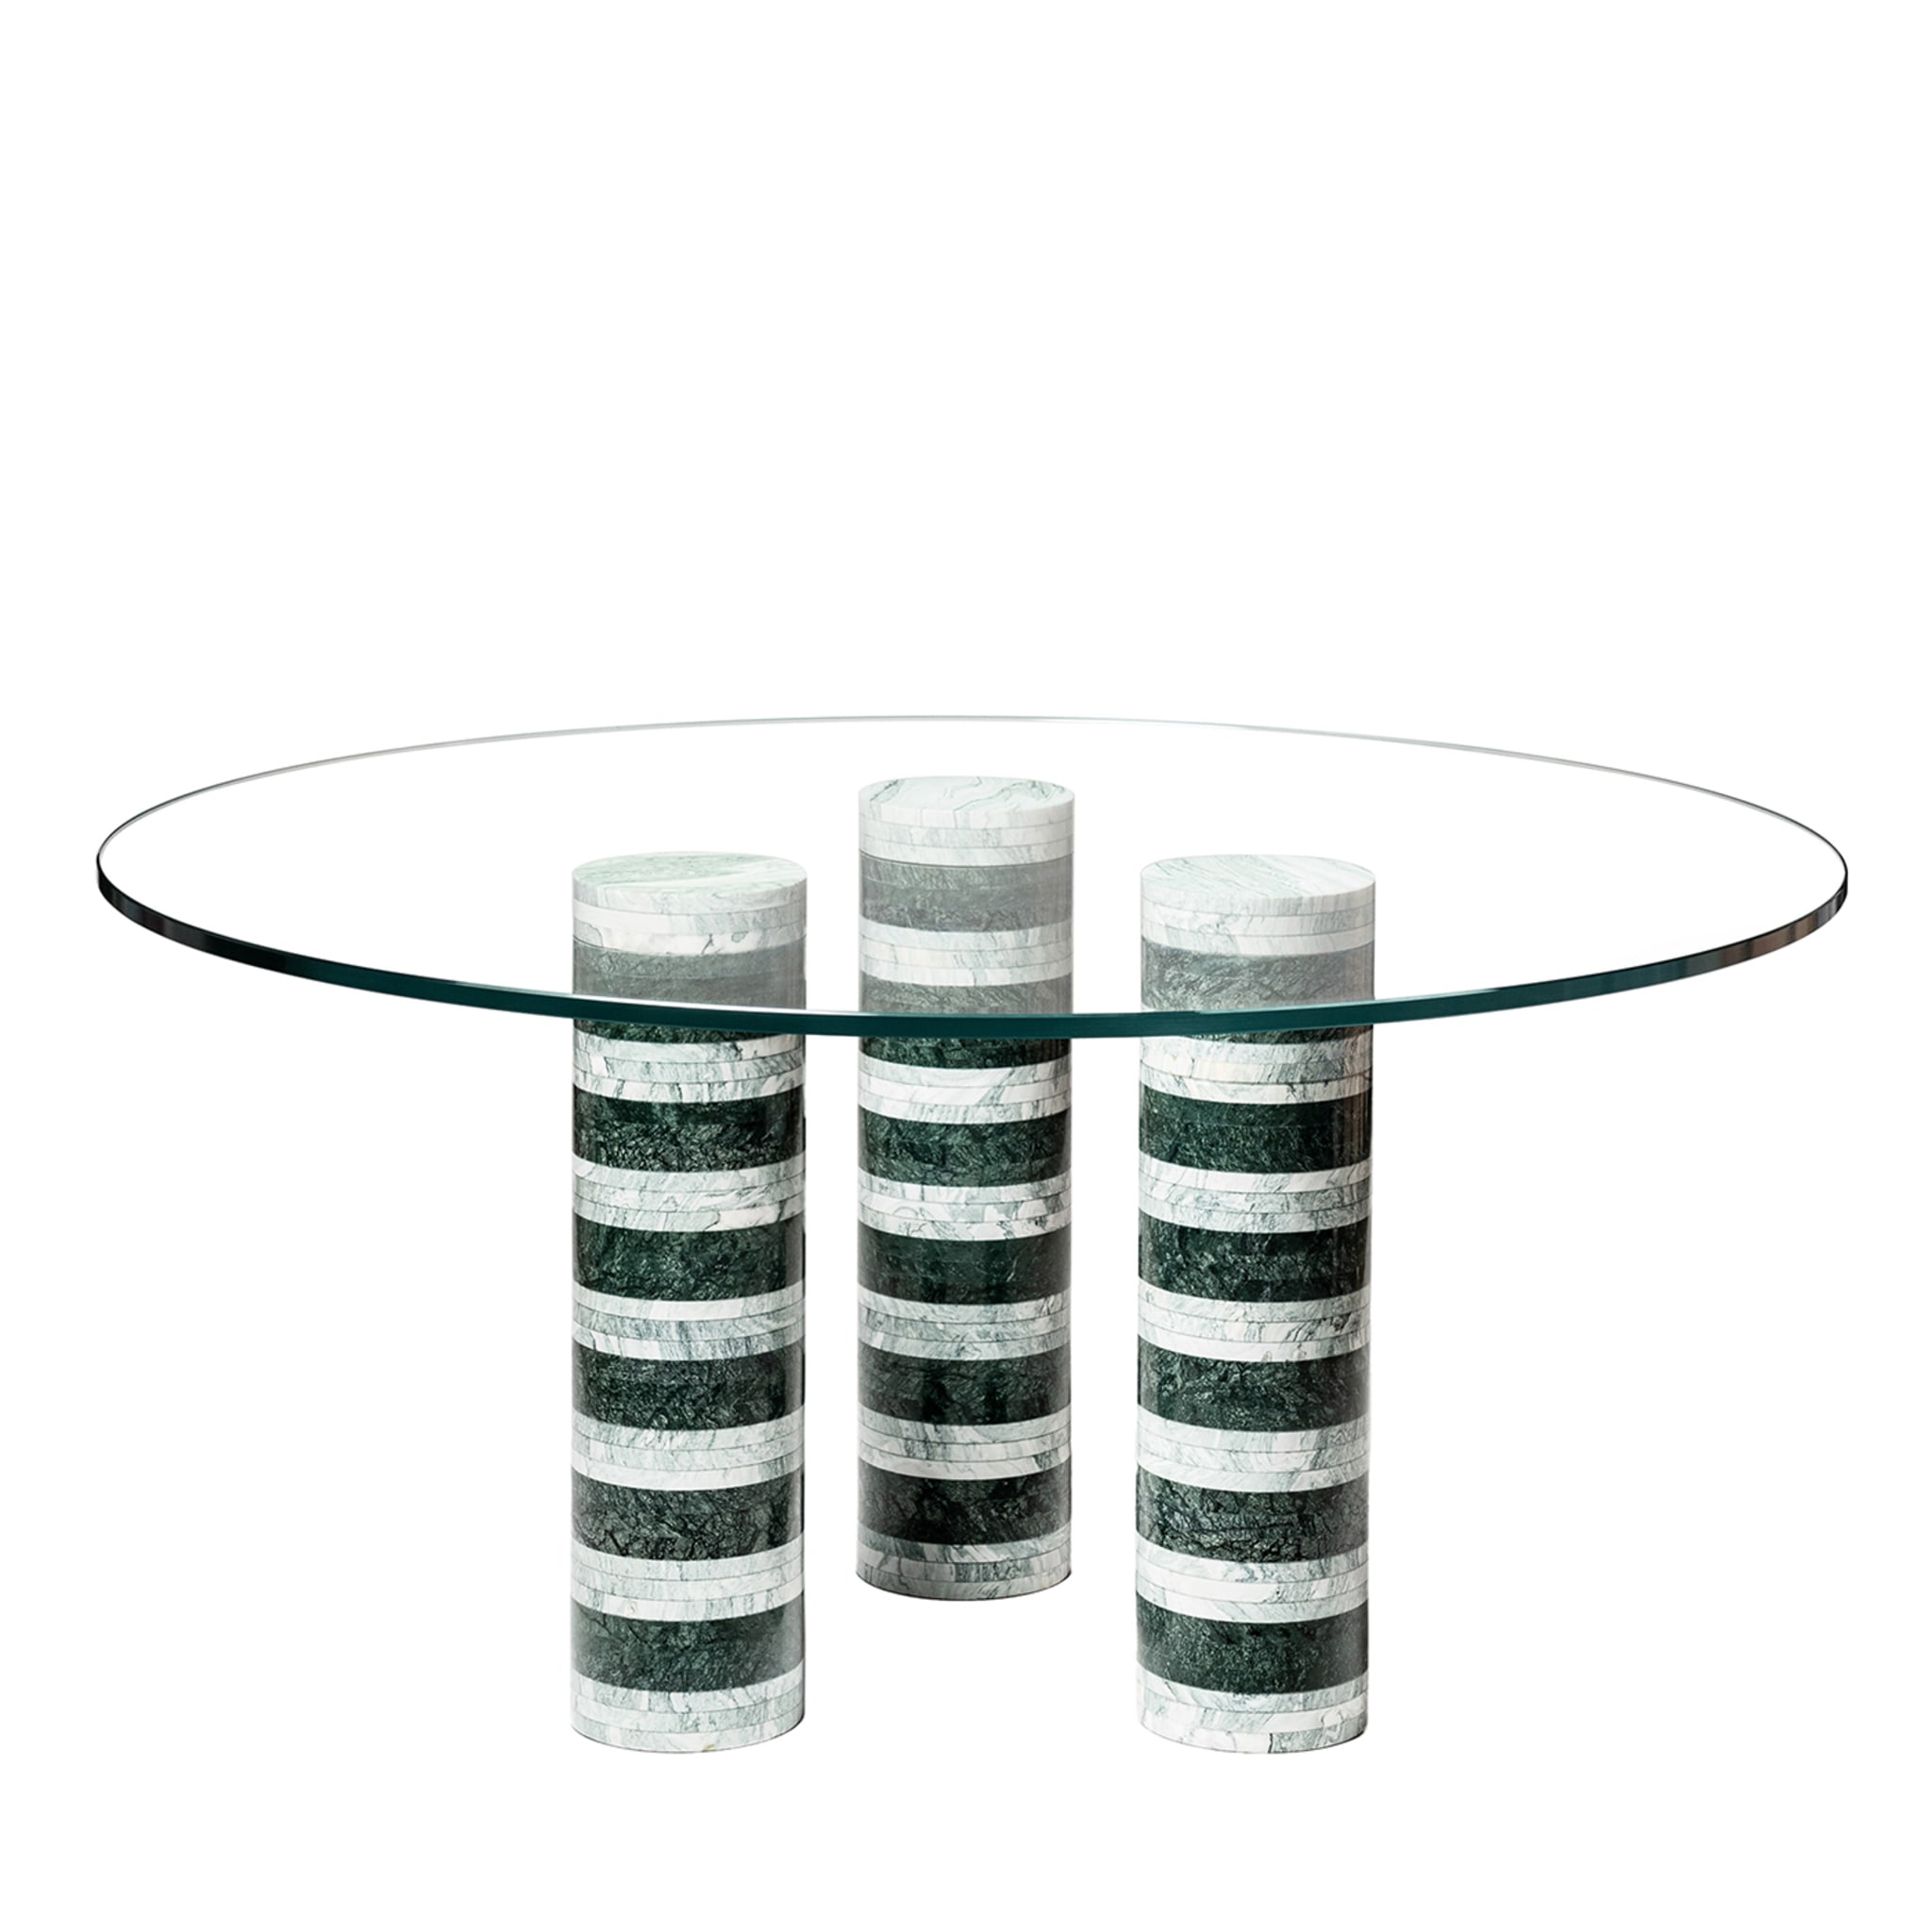 Architexture Living Table 03 by Patricia Urquiola - Main view